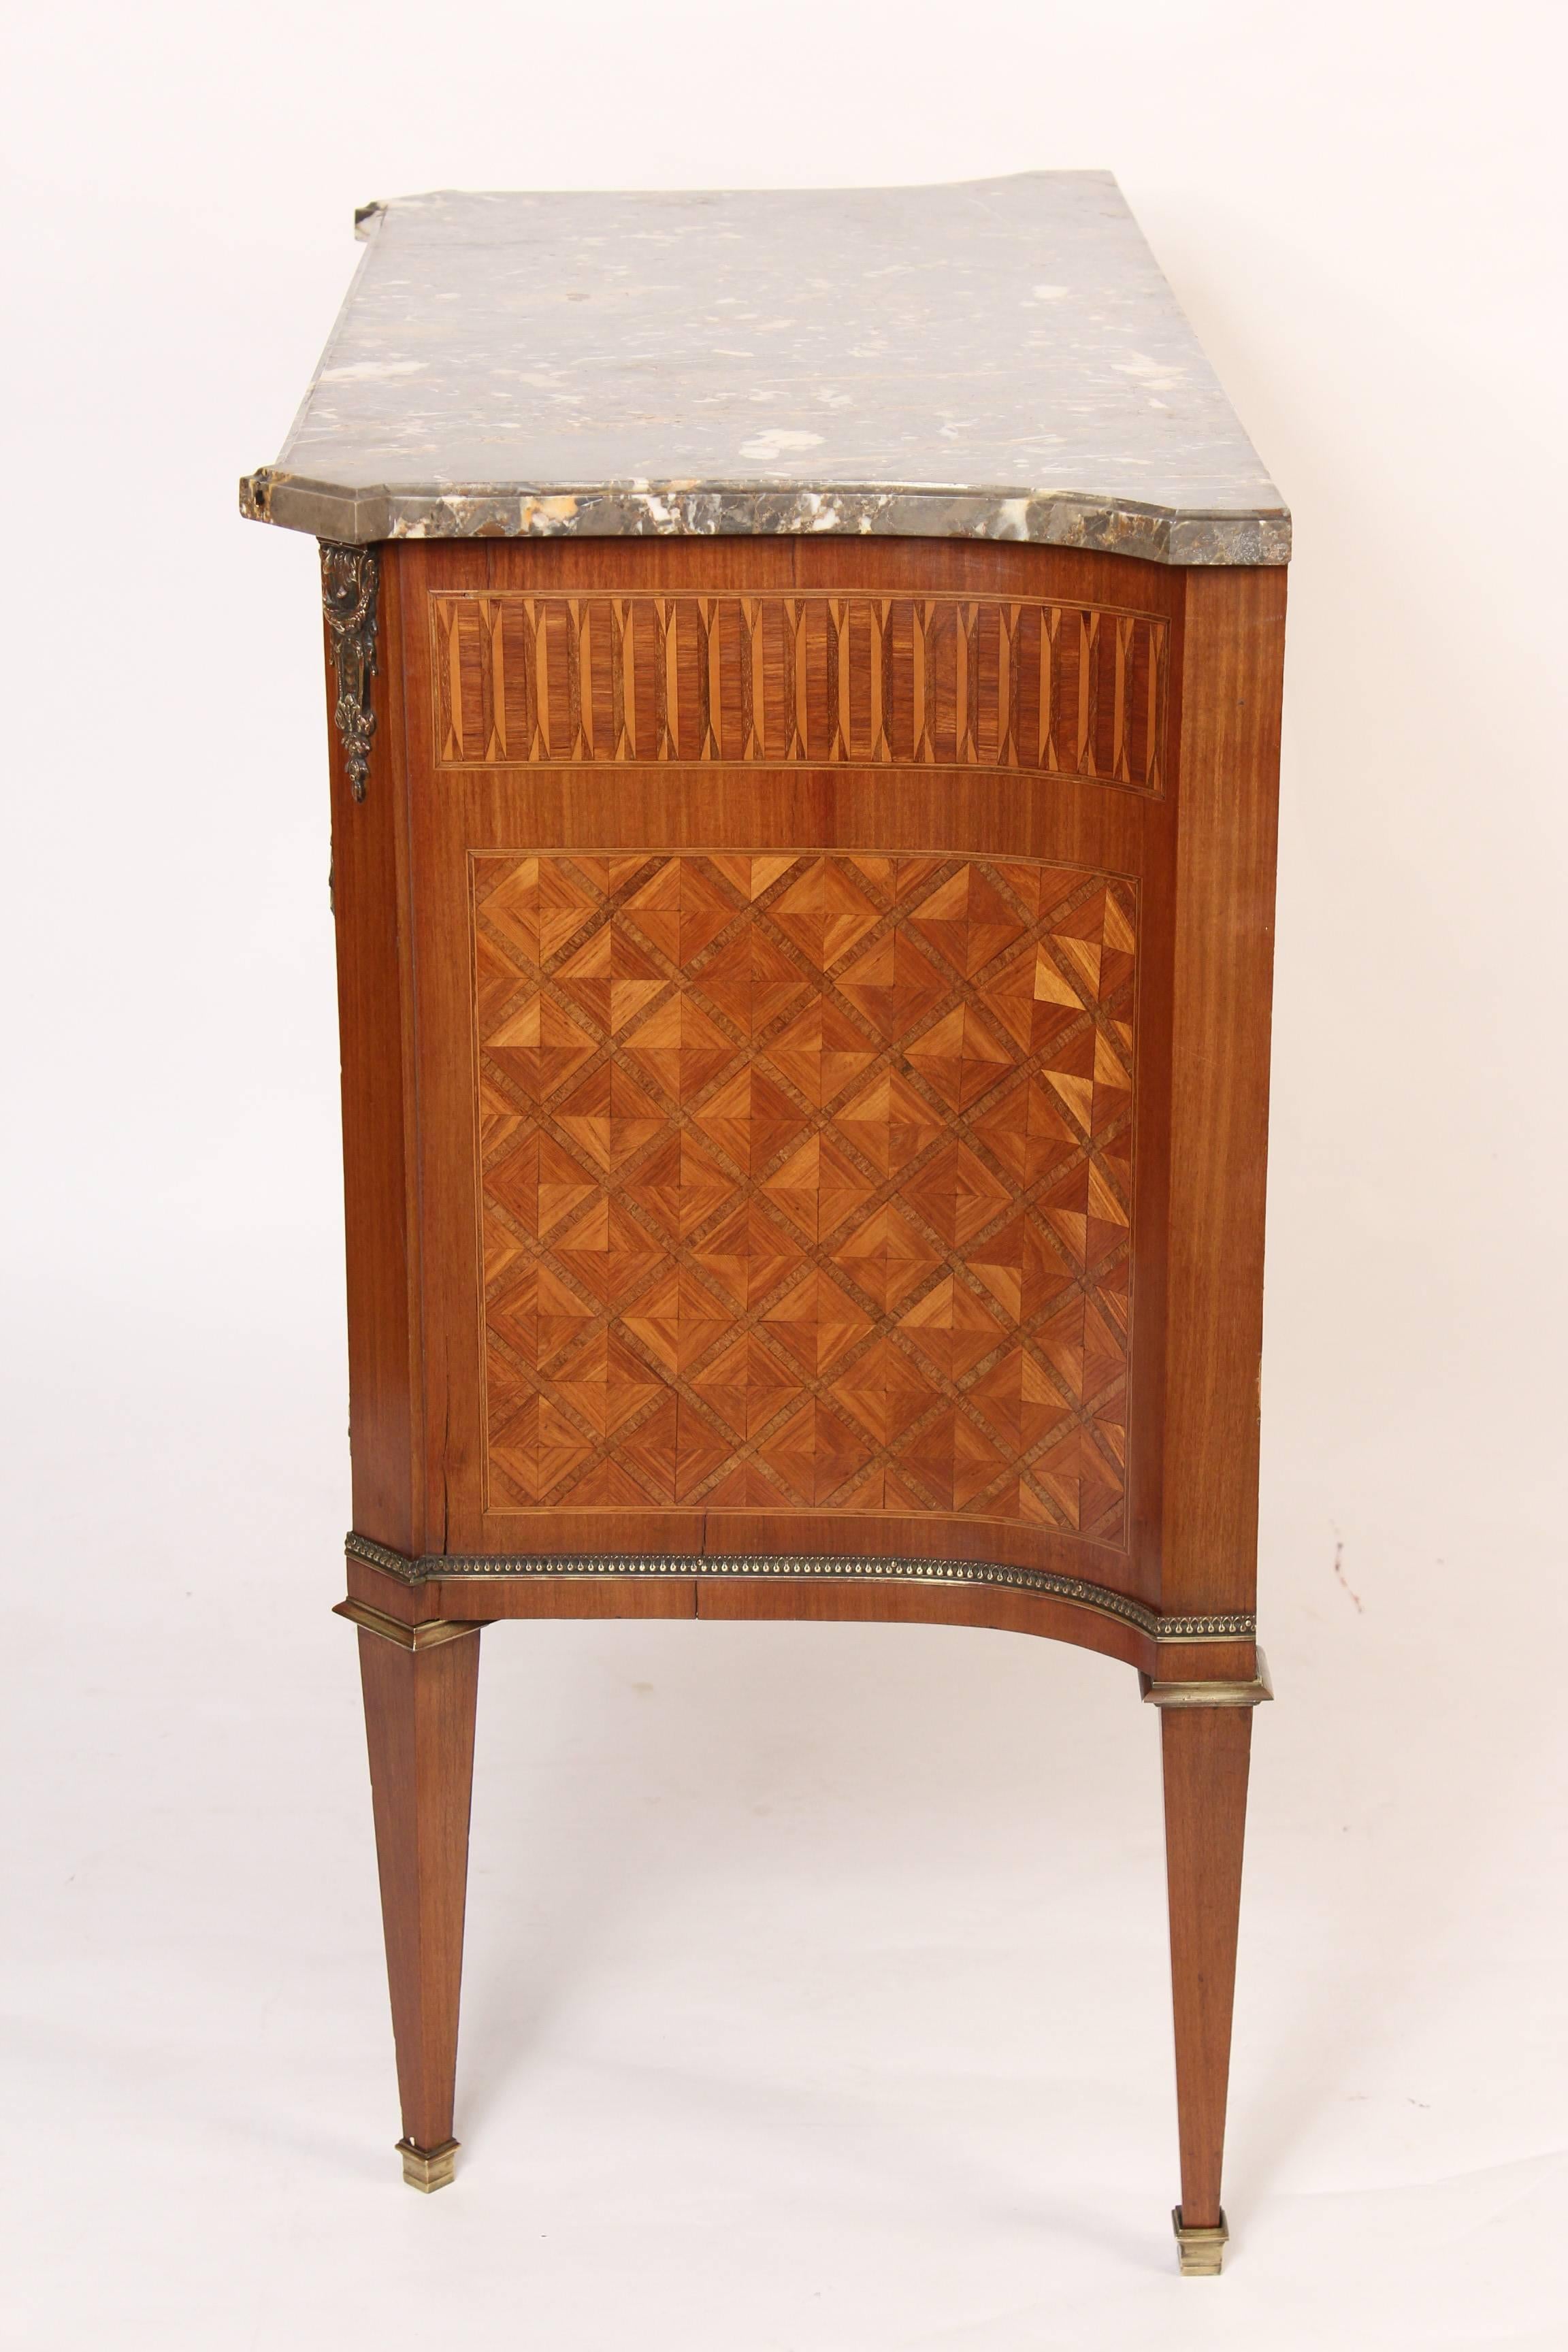 Louis XVI style tulip wood, satinwood, and mahogany parquetry inlaid bronze-mounted commode with a marble top, circa 1920s. Stenciled under marble France.